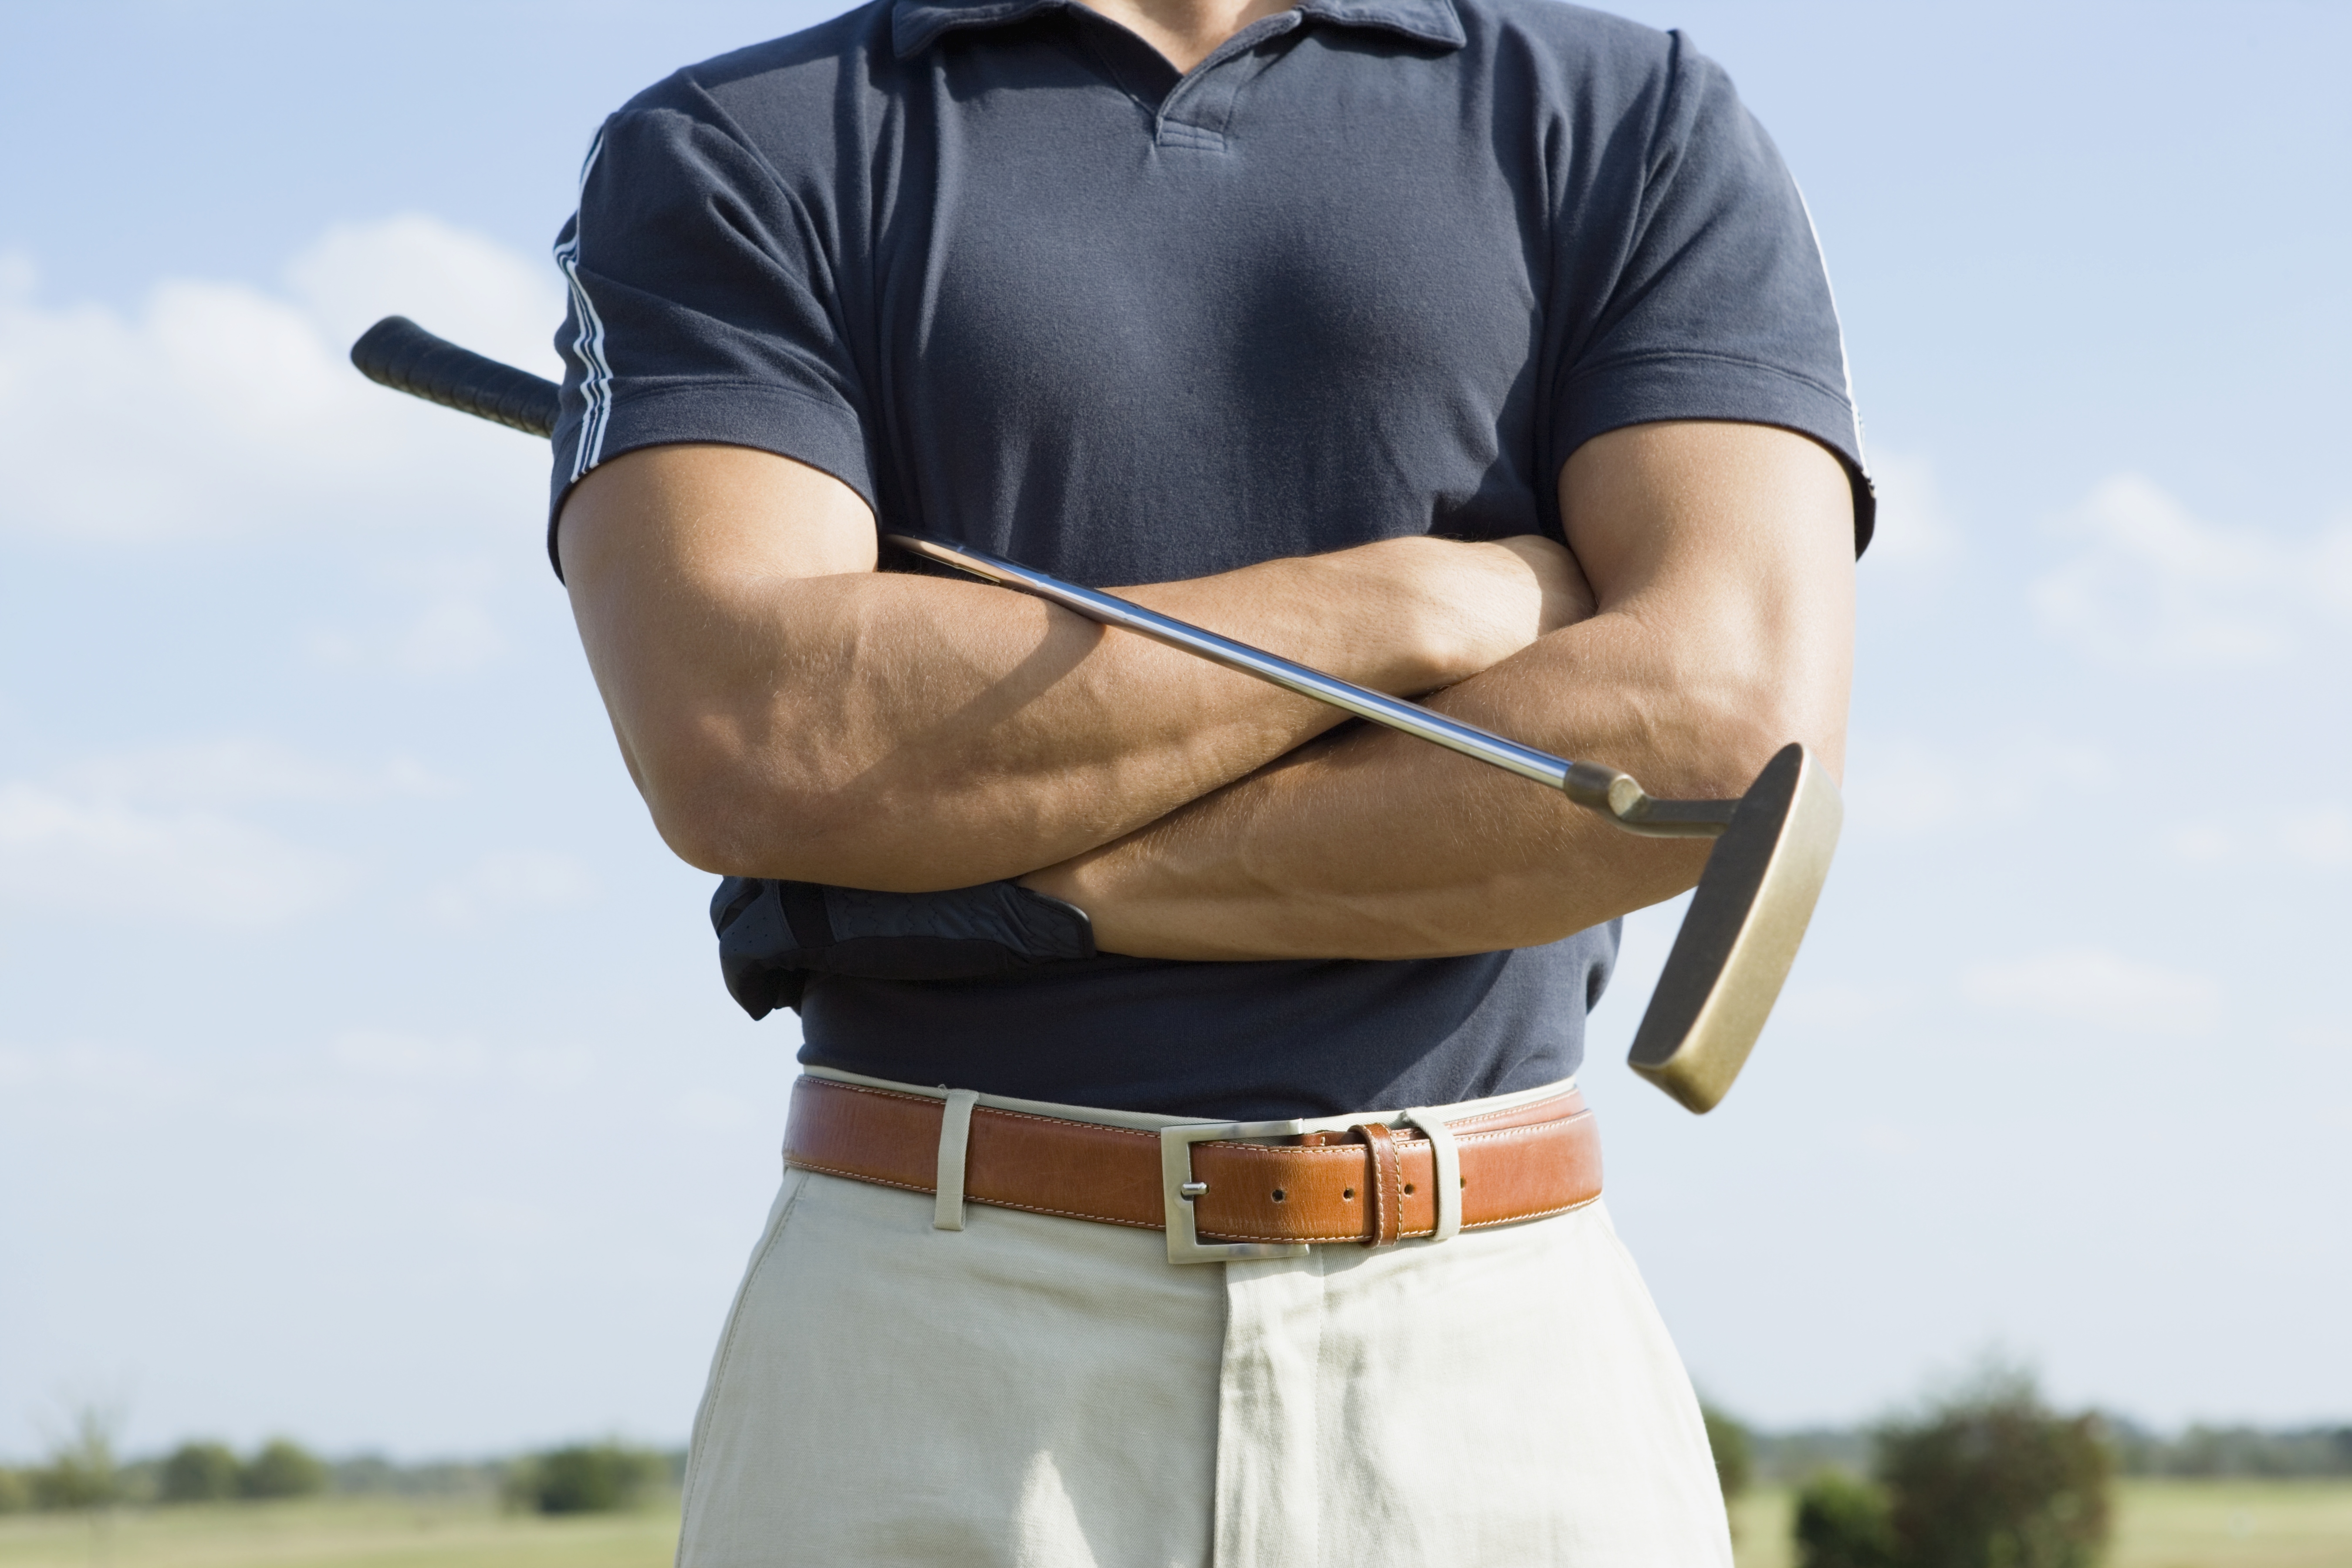 Strong man playing golf